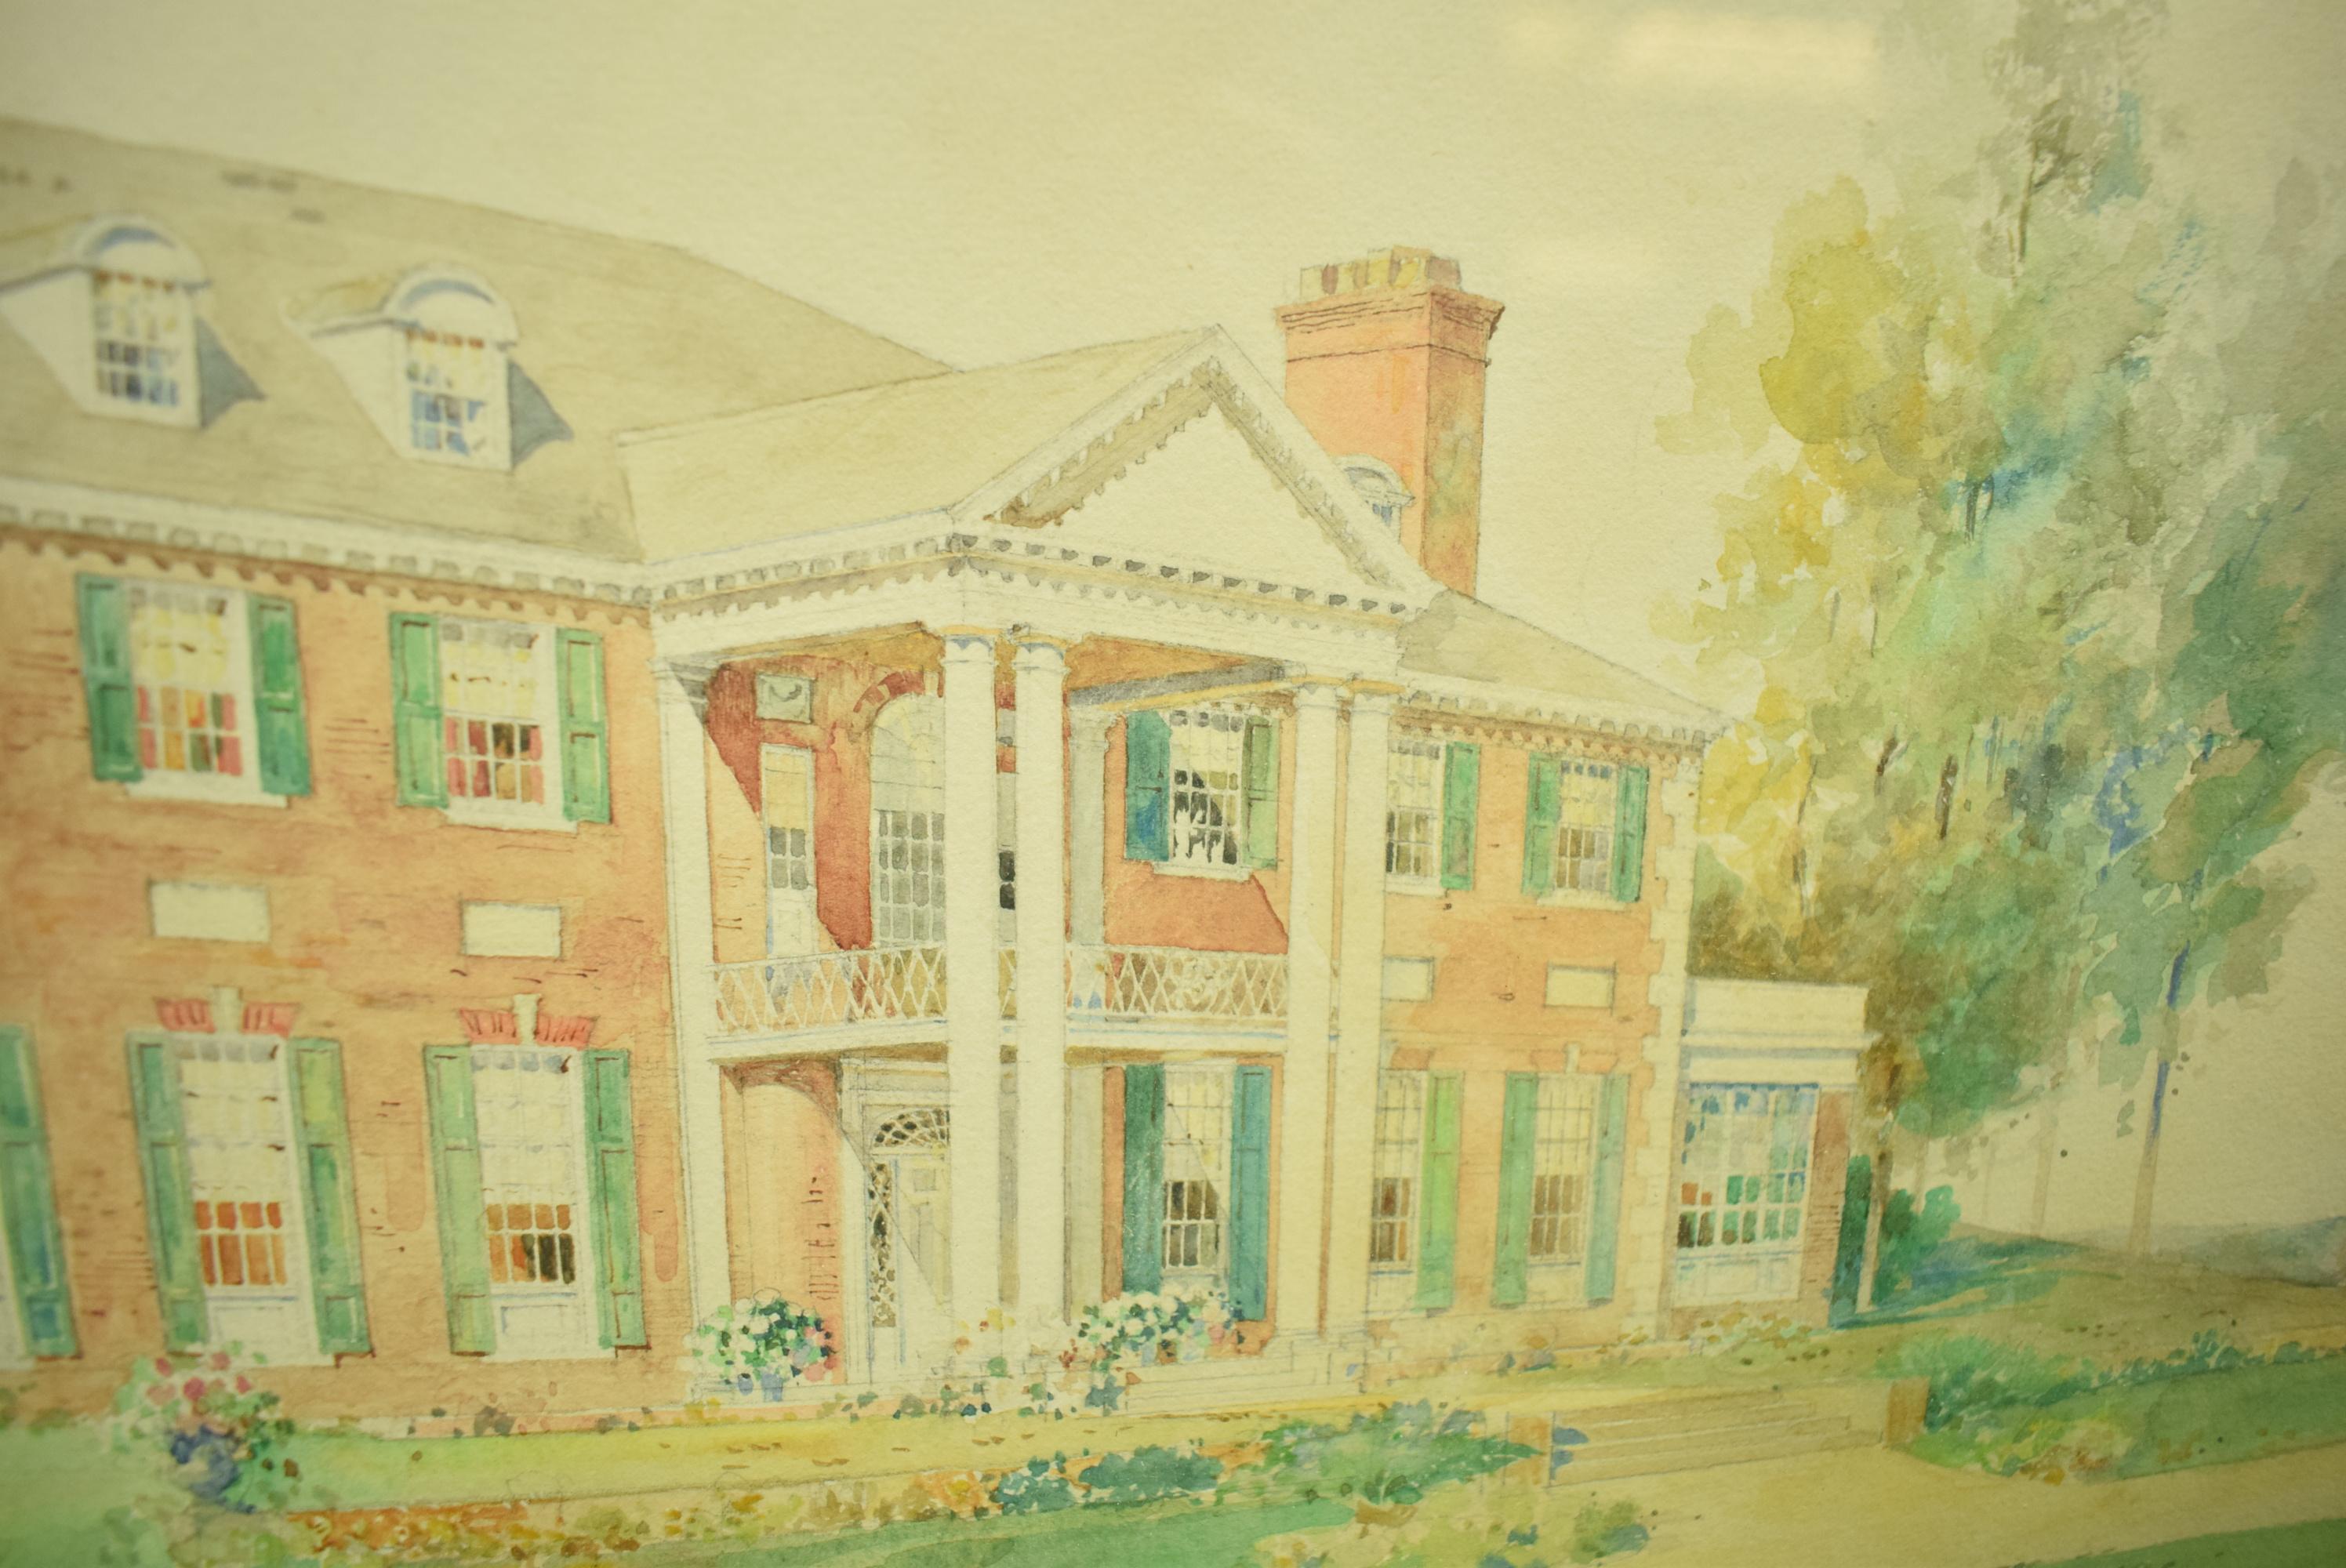 Classic watercolor of the Clarence Birdseye Estate in Gloucester, Mass designed by Thomas Hixon (architect)

Art Sz: 13 5/8